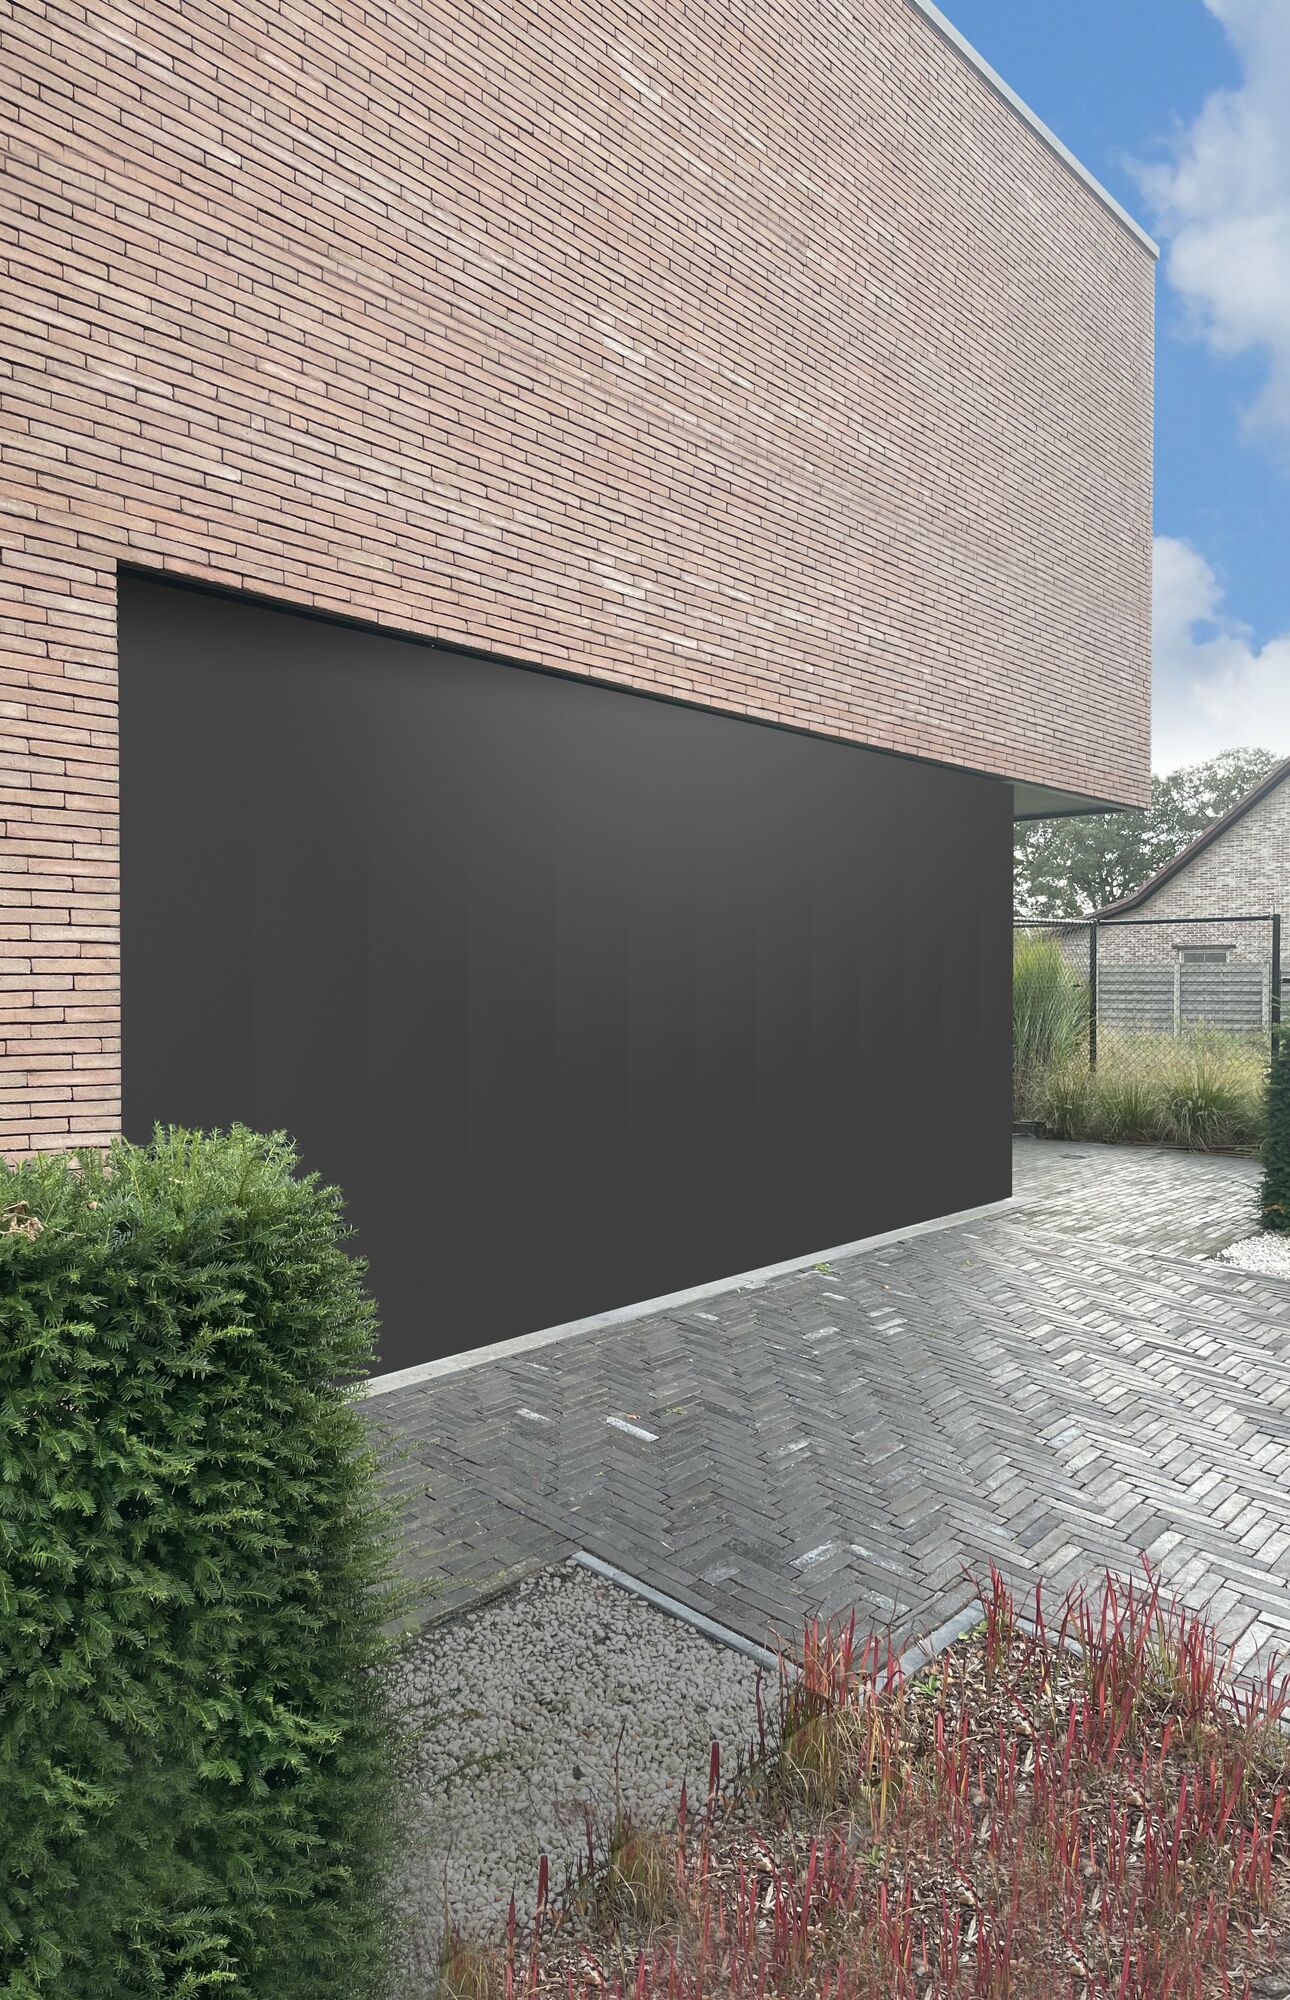 House with black outdoor panels